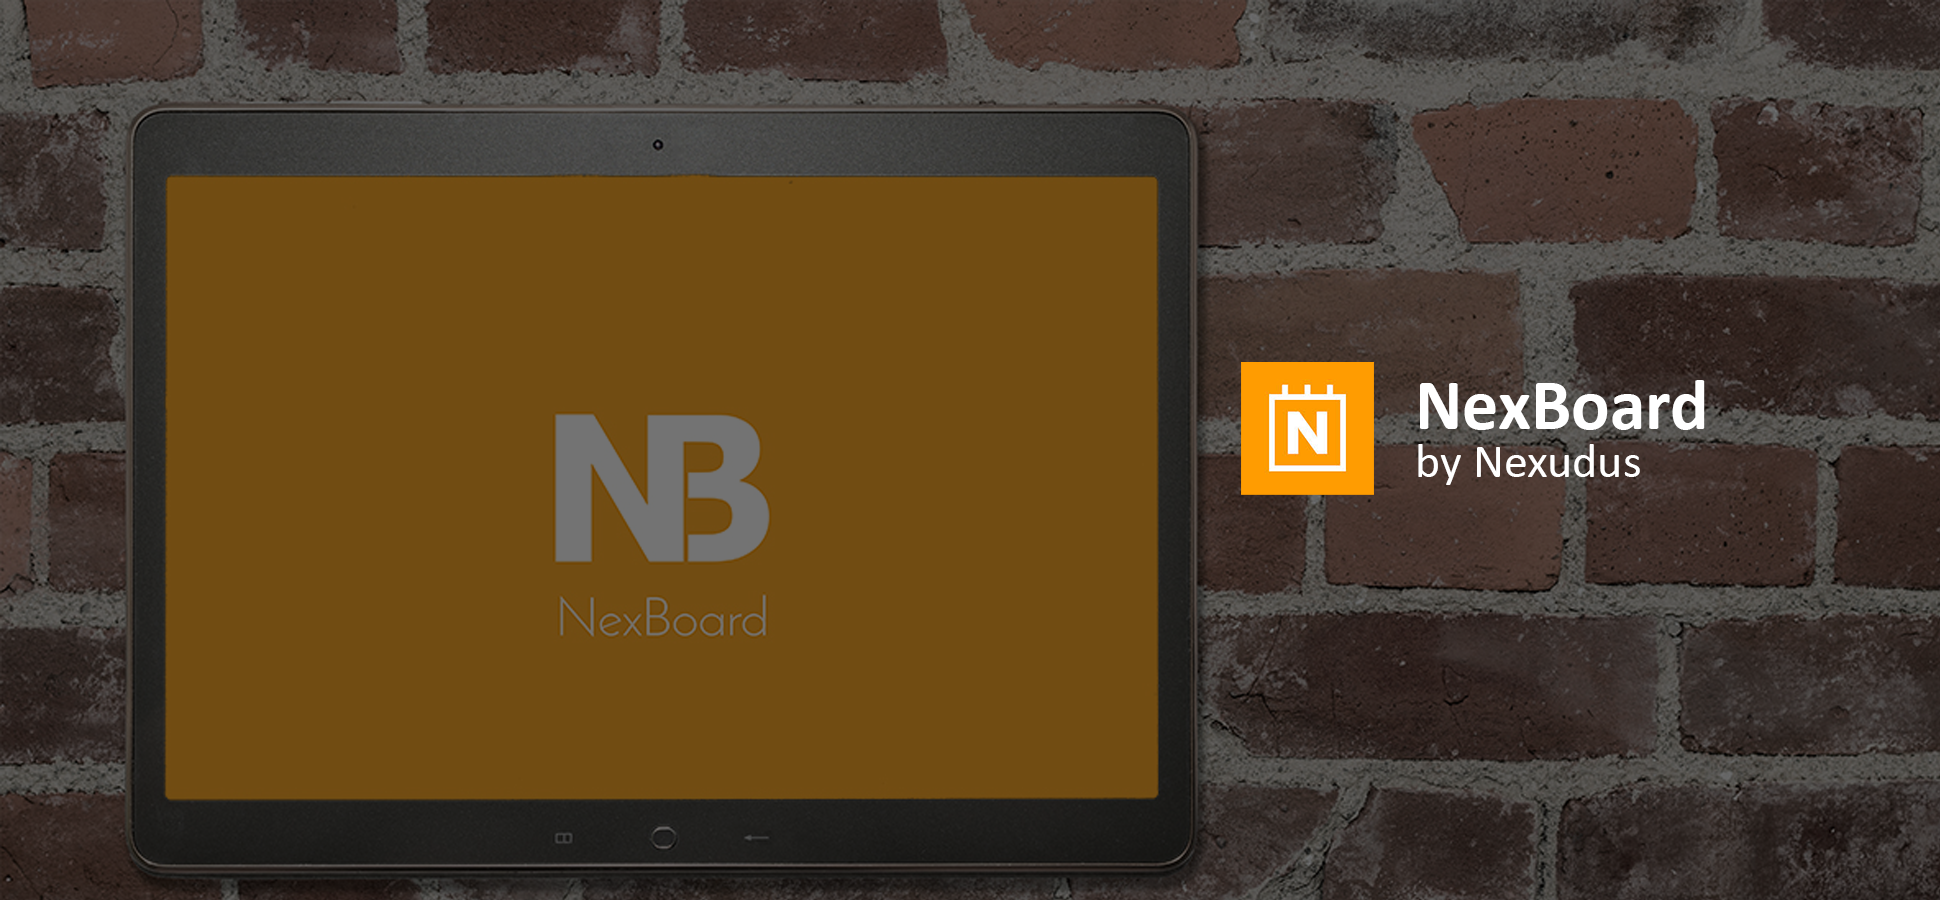 Your next meeting is just a click away with the new NexBoard app